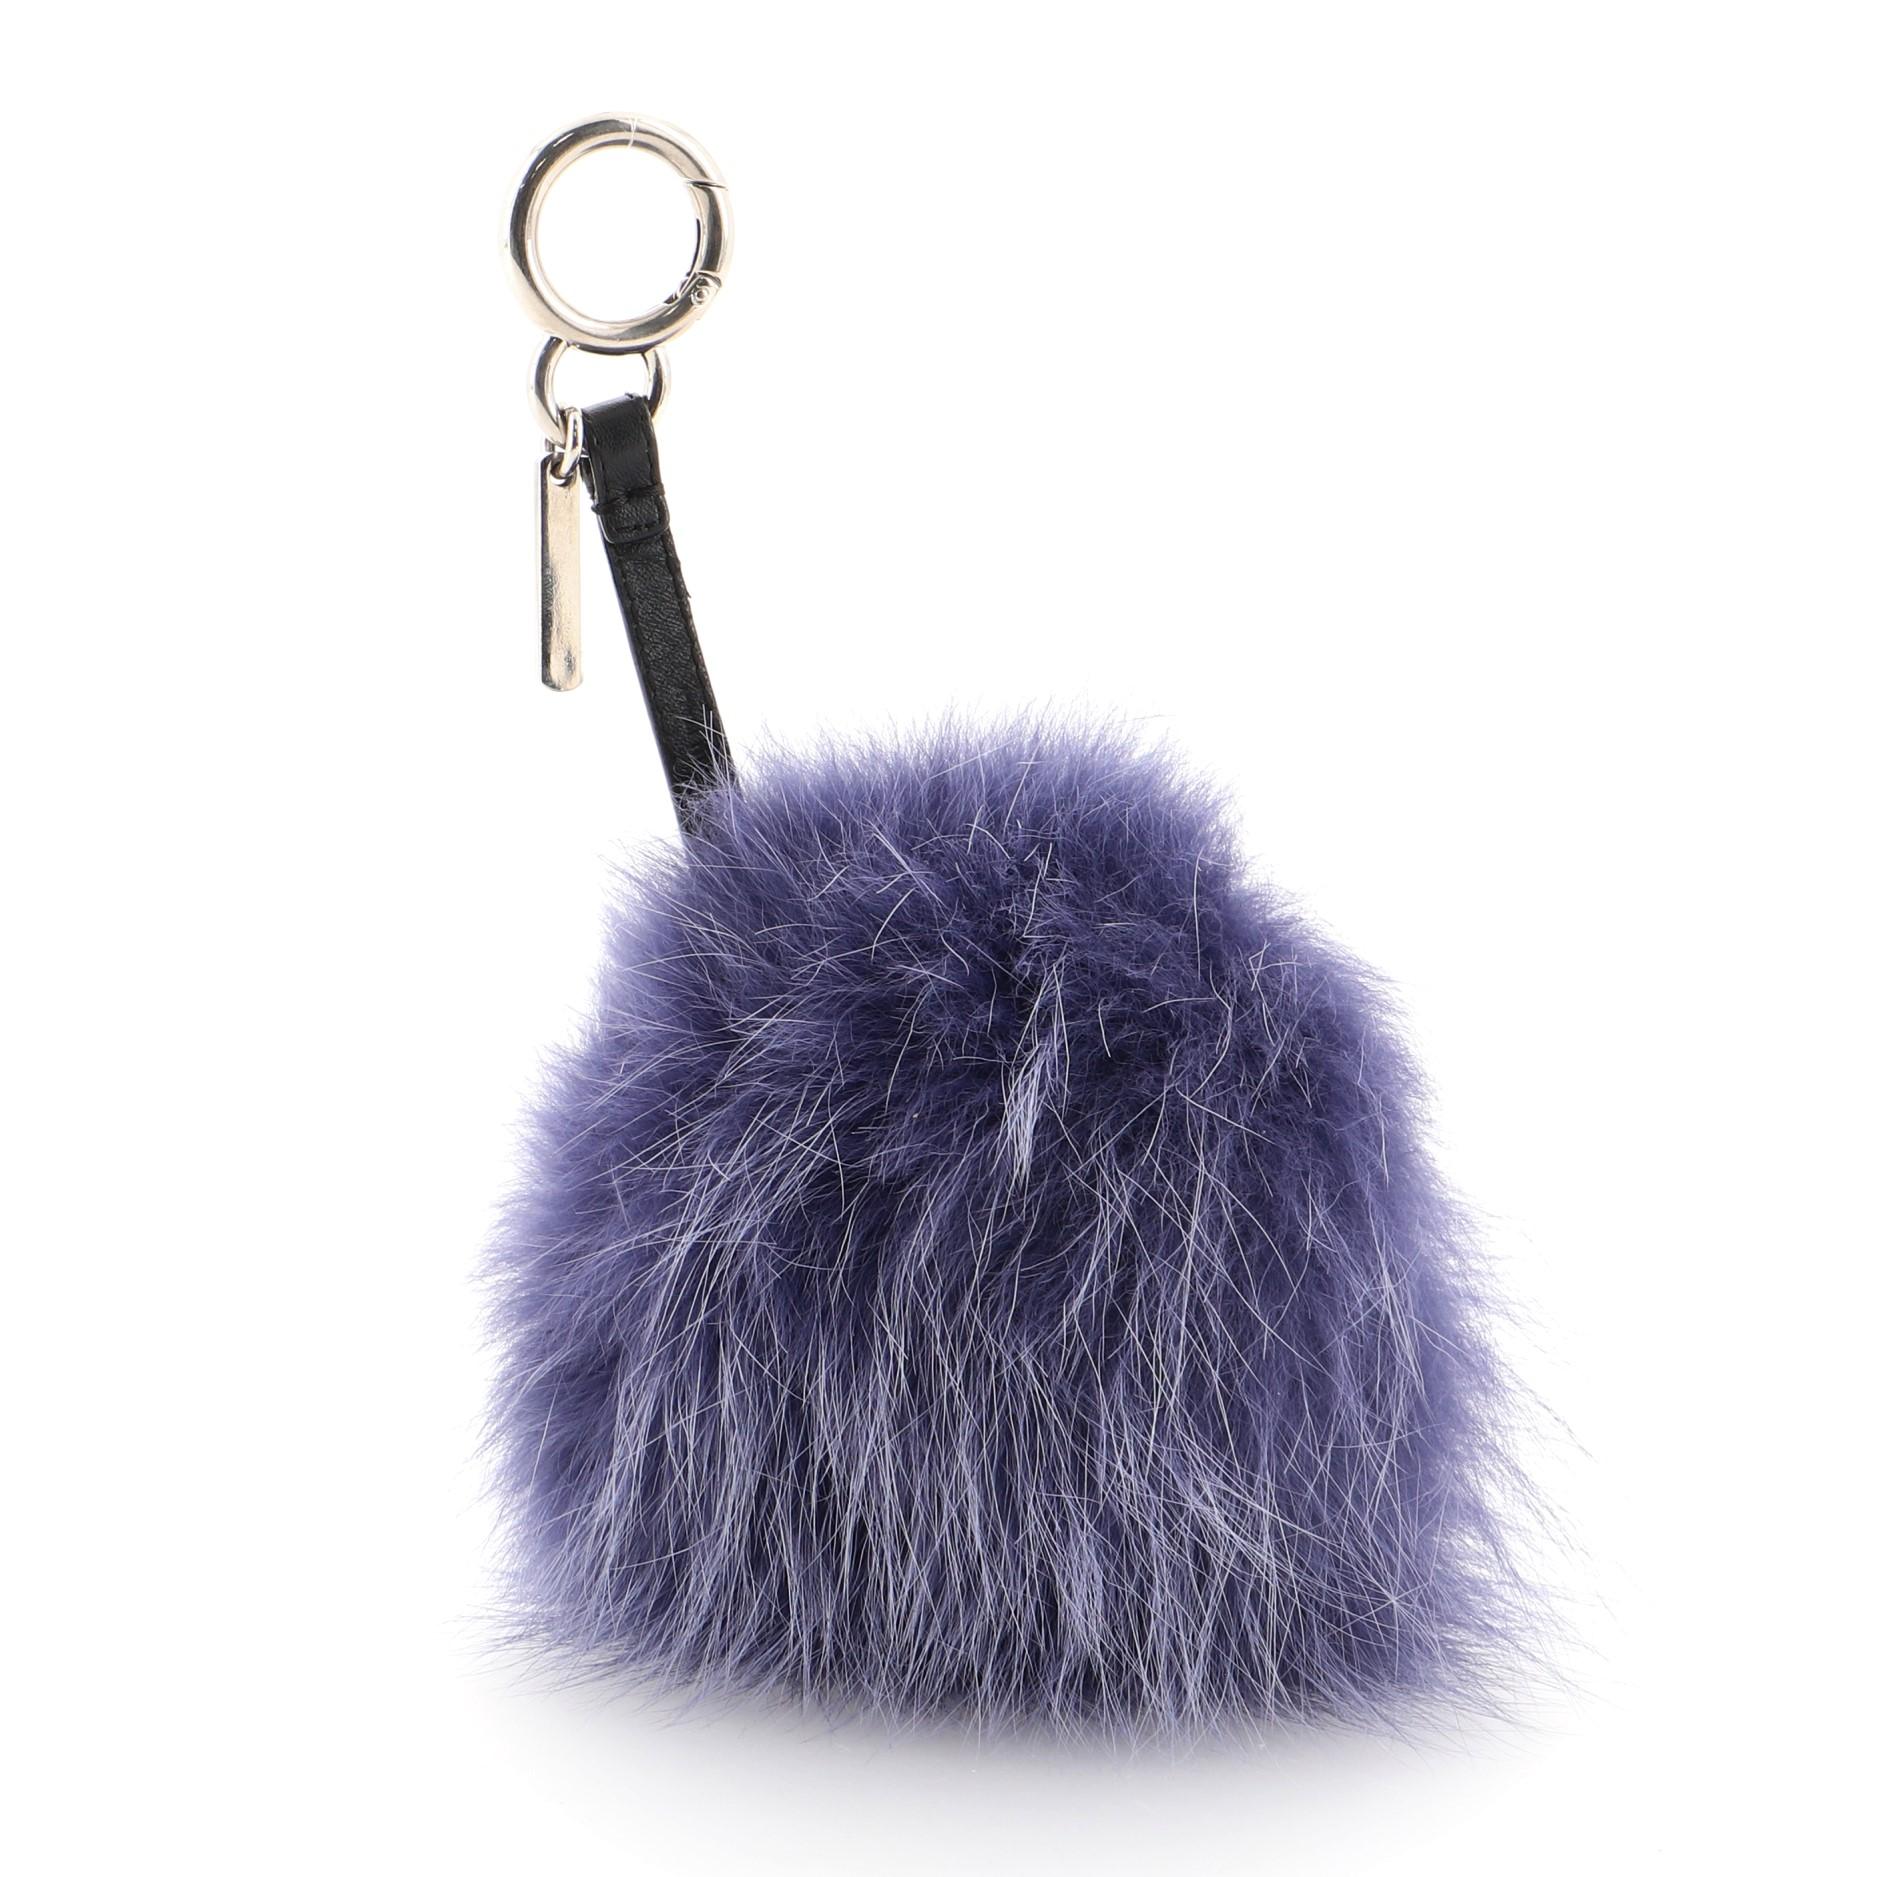 Fendi Monster Bug Bag Charm Fur with Leather
Purple

Condition Details: Scratches on hardware.

51864MSC

Height 9